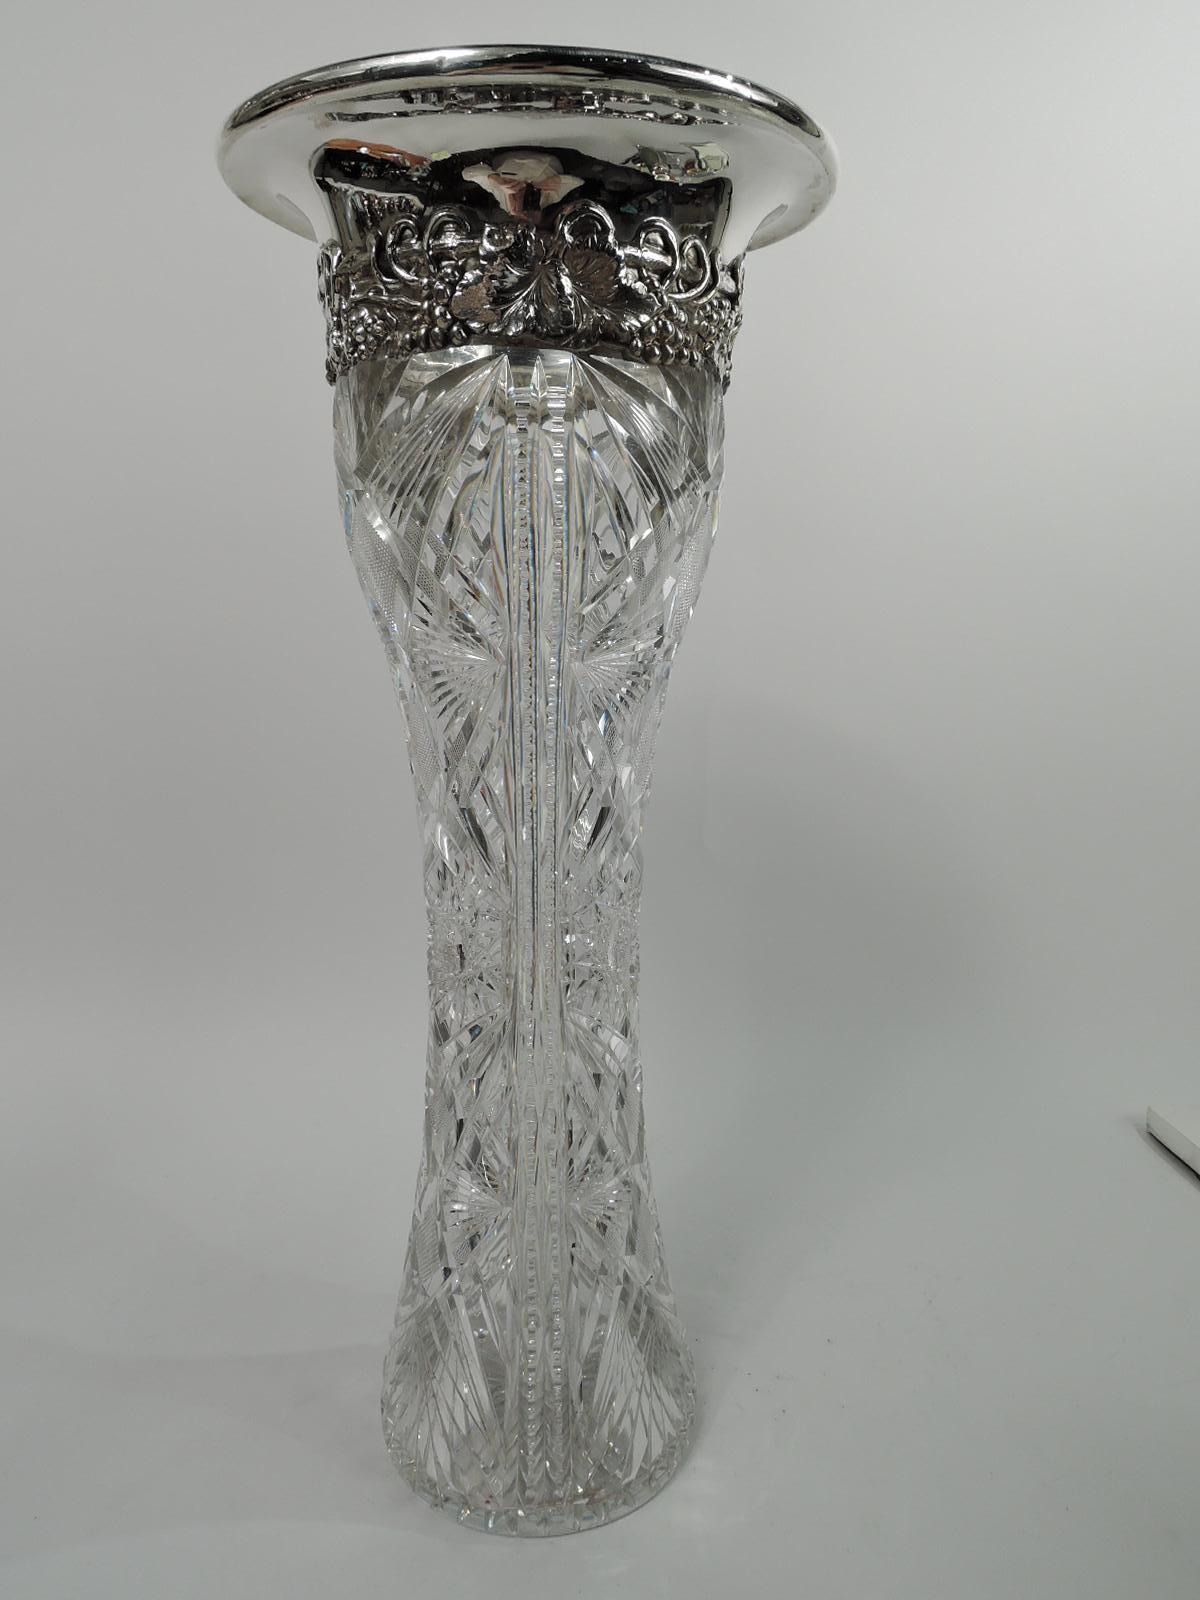 Turn-of-the-century brilliant-cut glass and sterling silver vase. Made by J. F. Fradley & Co. in New York. Tall and waisted cylinder with ferns, stars, and diaper between double notched vertical borders. Sterling silver collar with applied fruiting